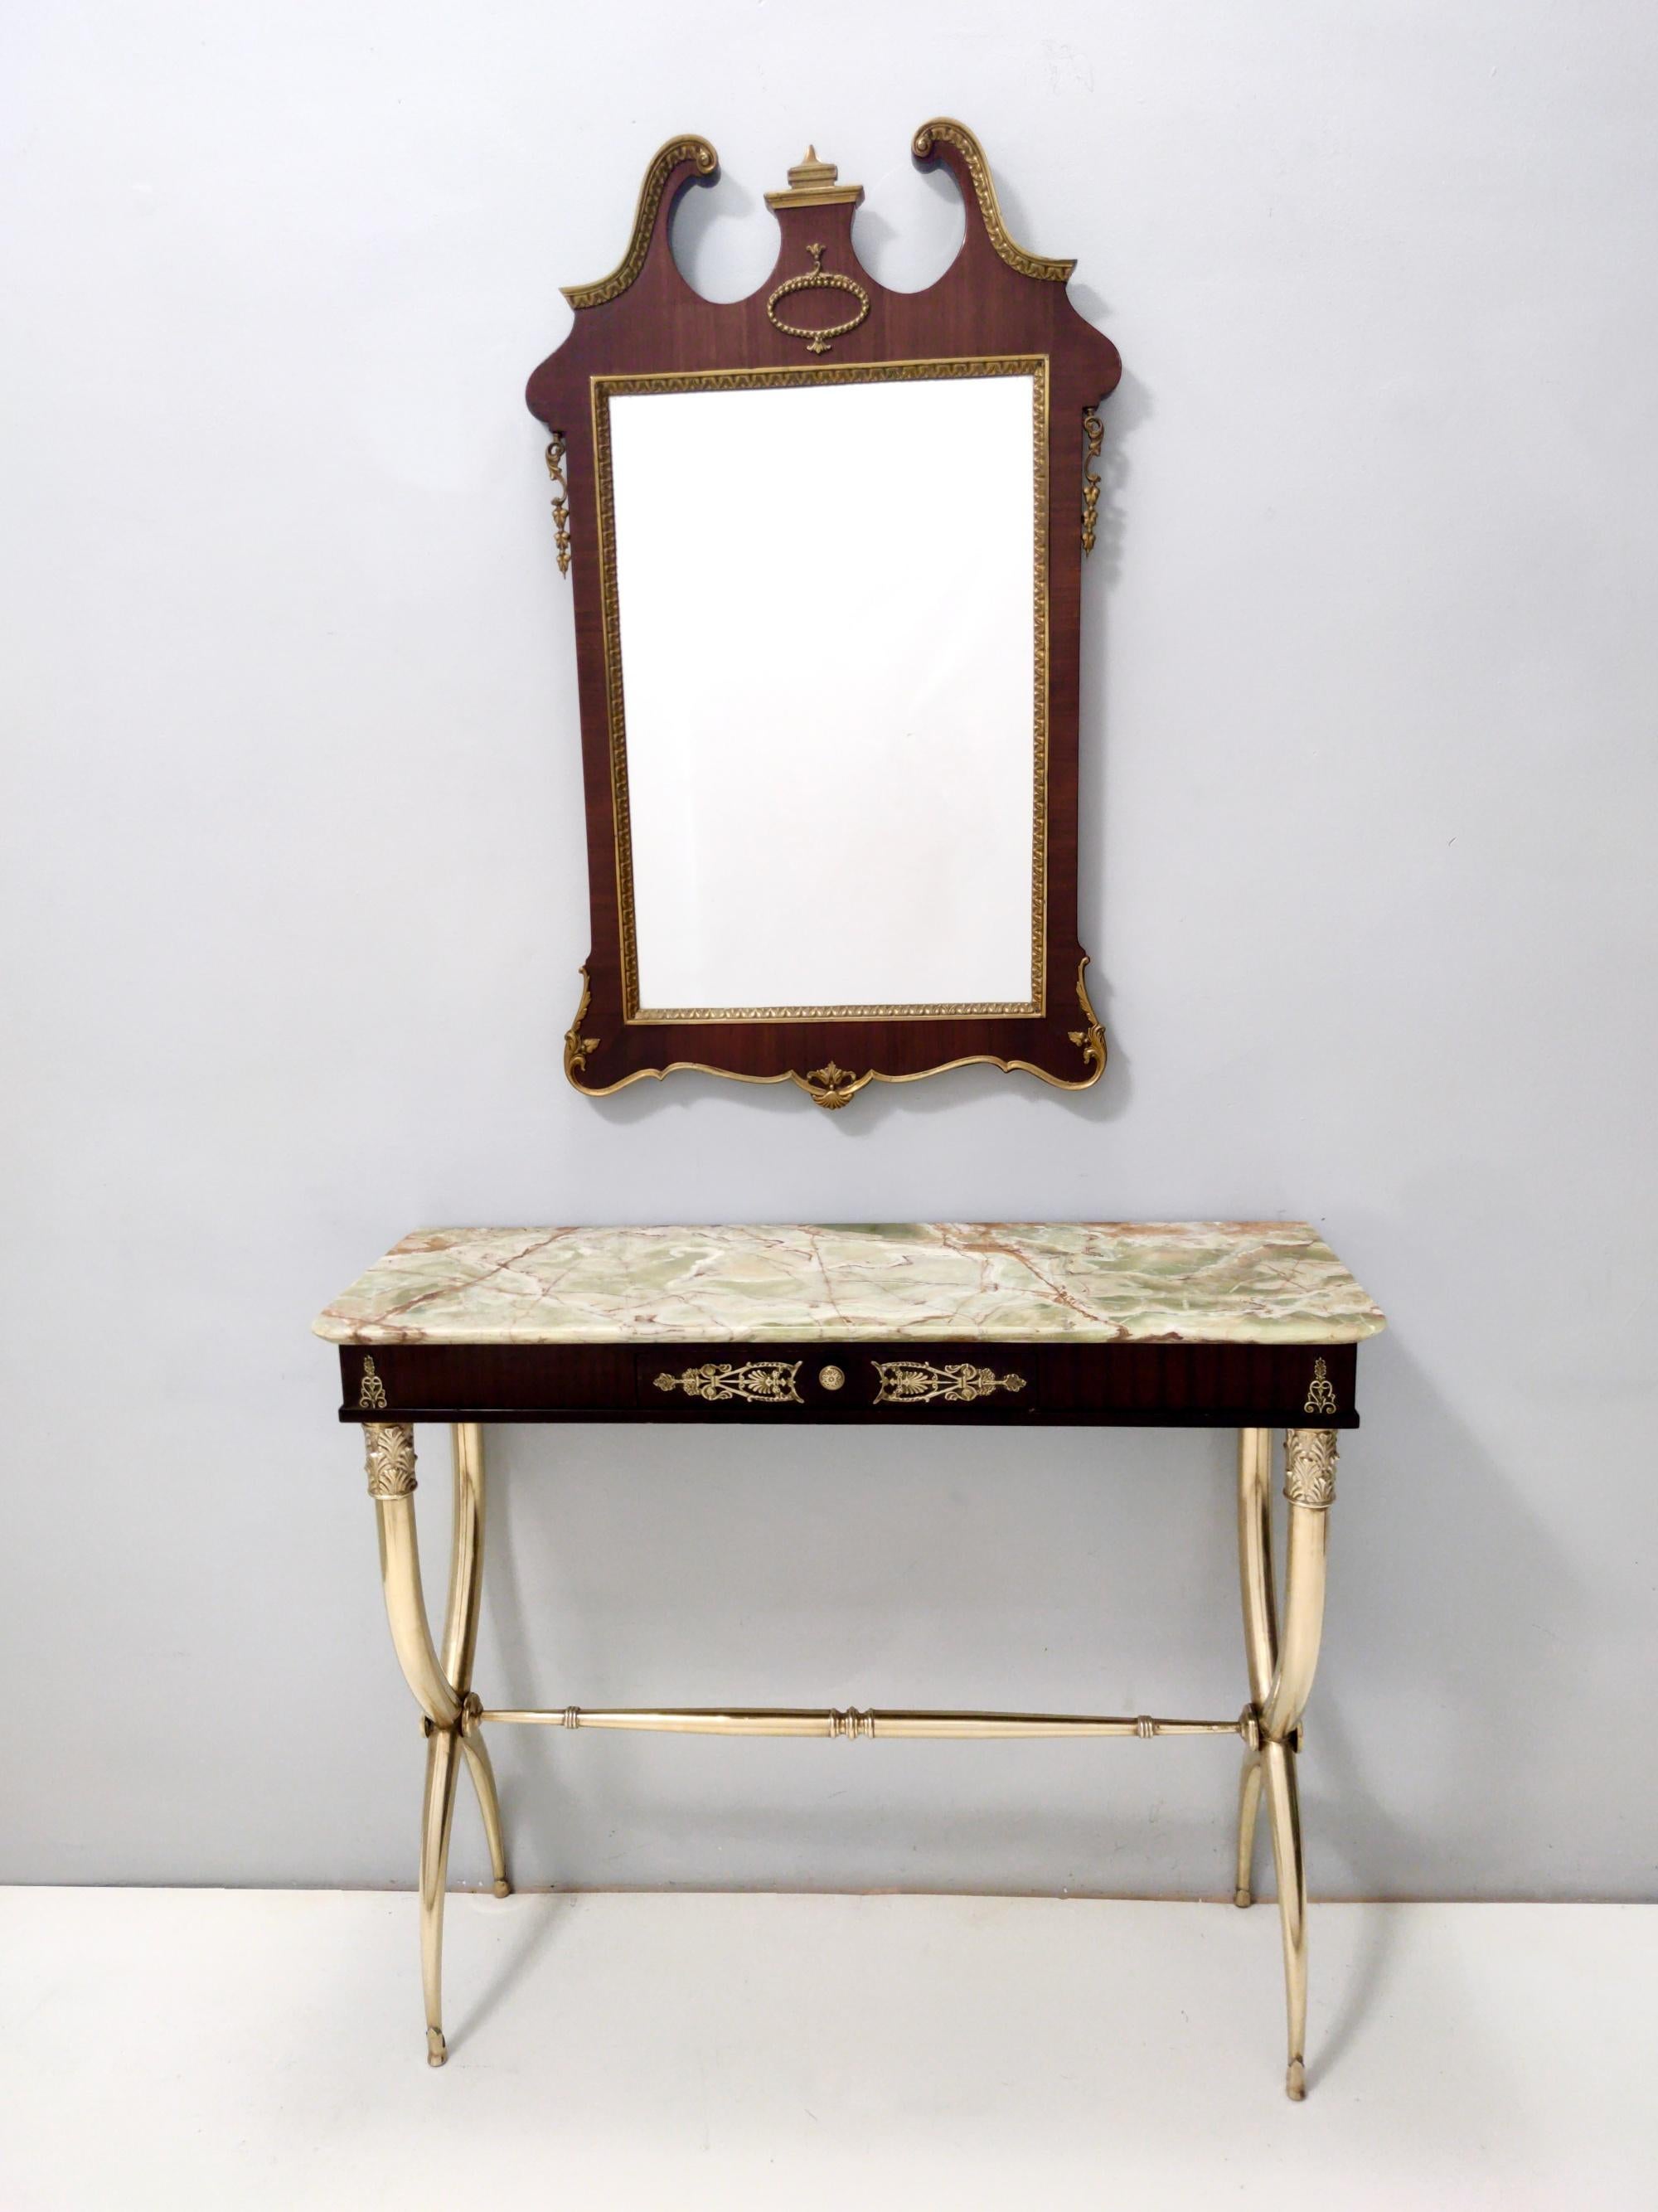 Made in Italy, 1960s. 
This mirror features an ebonized beech frame with cast brass details. 
It might show slight traces of use since it's vintage, but it can be considered as in very good original condition and ready to become a piece in a home.